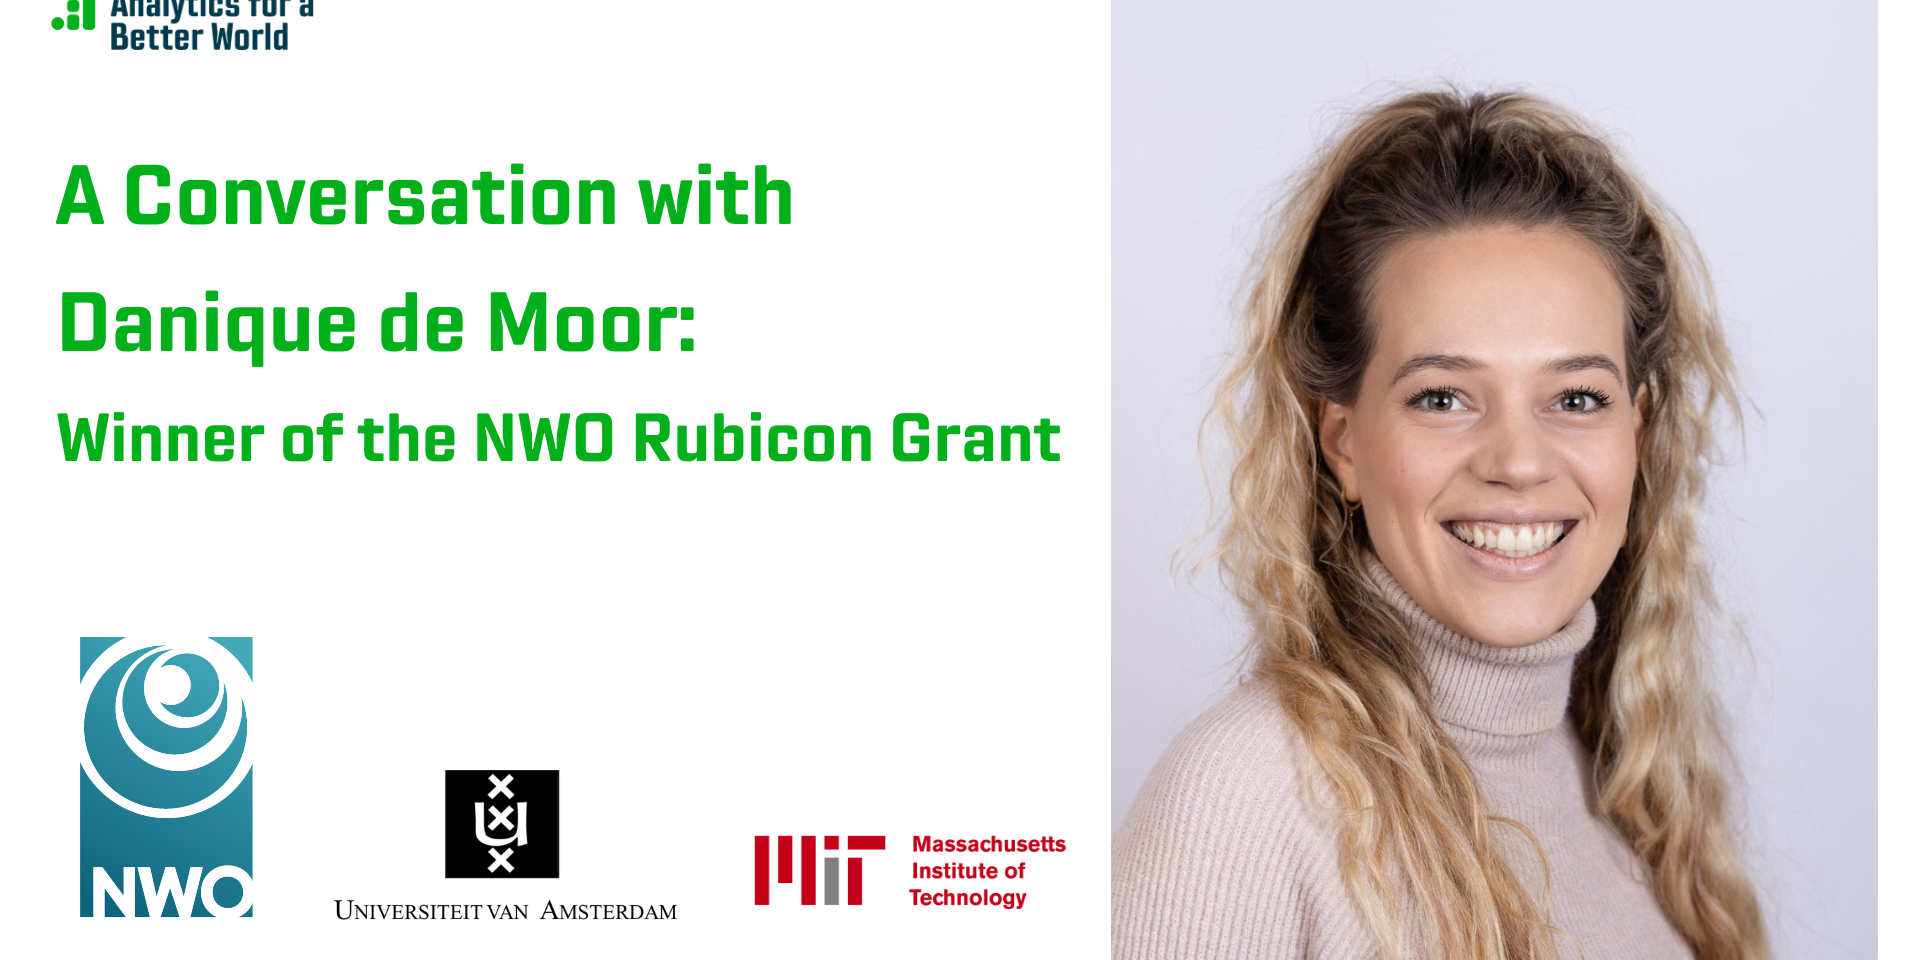 A Conversation with Danique de Moor, Winner of the NWO Rubicon Grant on an ABW Topic